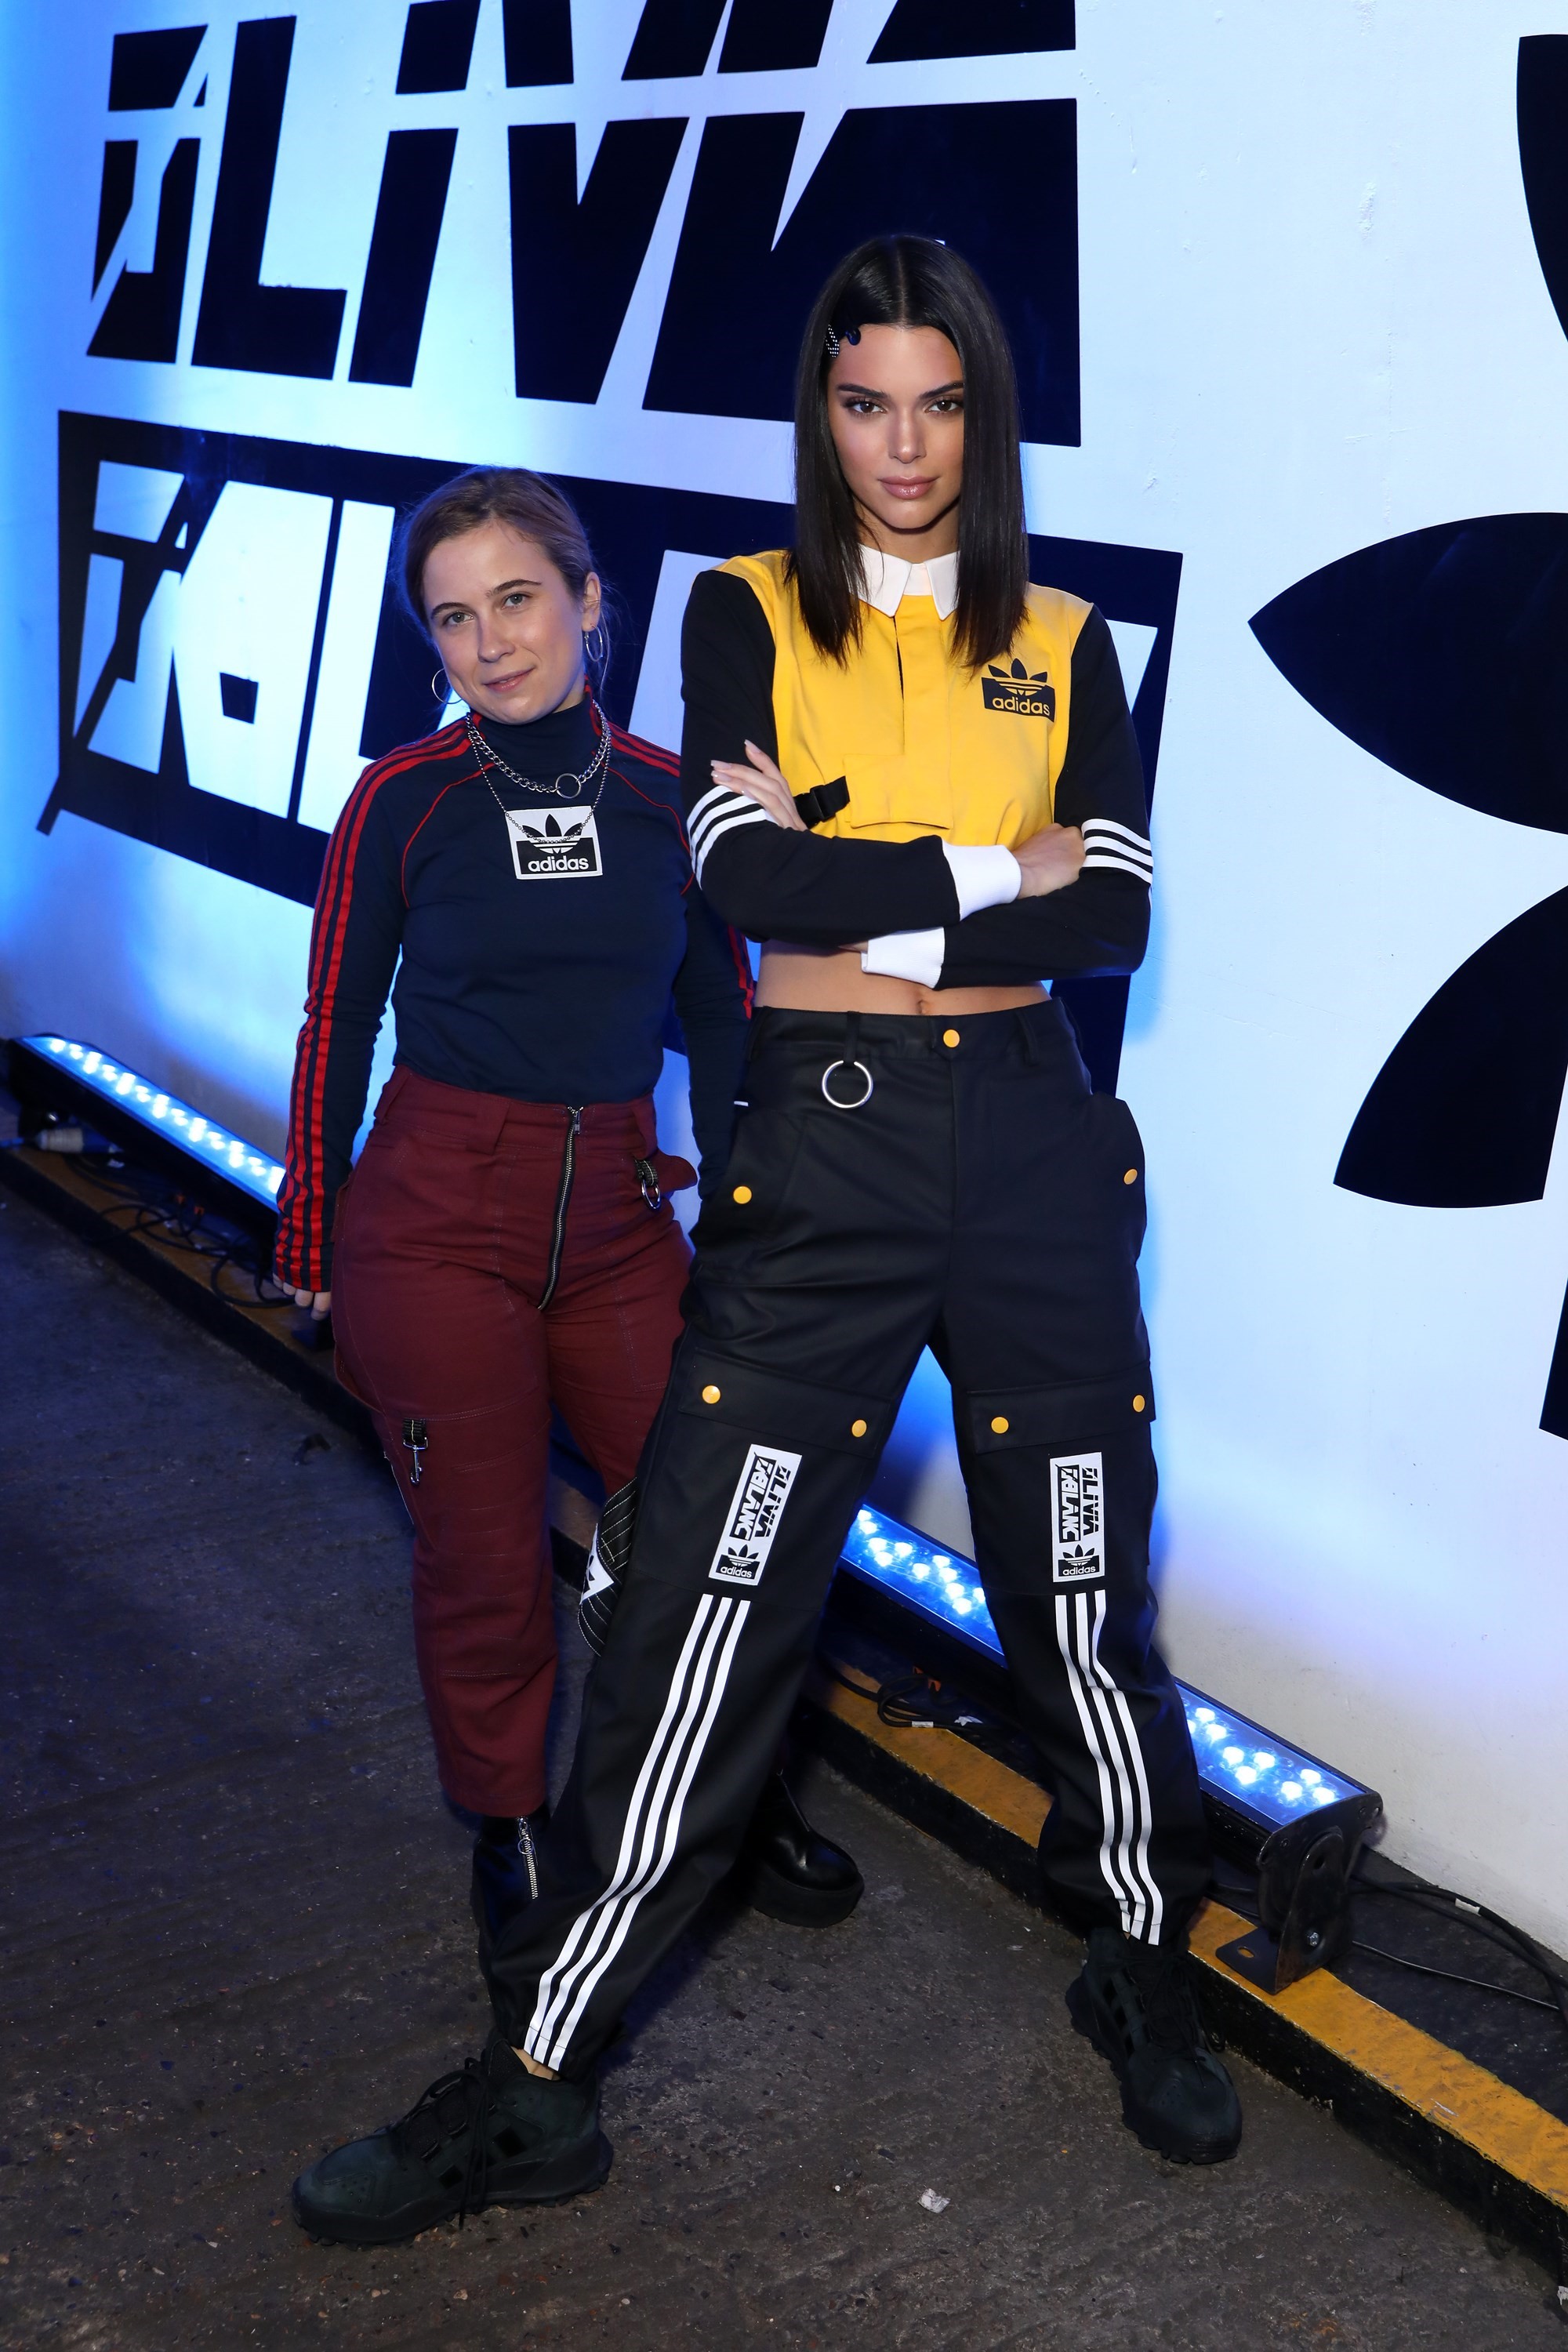 Contract Plicht Bliksem Kendall Jenner & Olivia Oblanc host launch for new adidas Originals collab  | Dazed